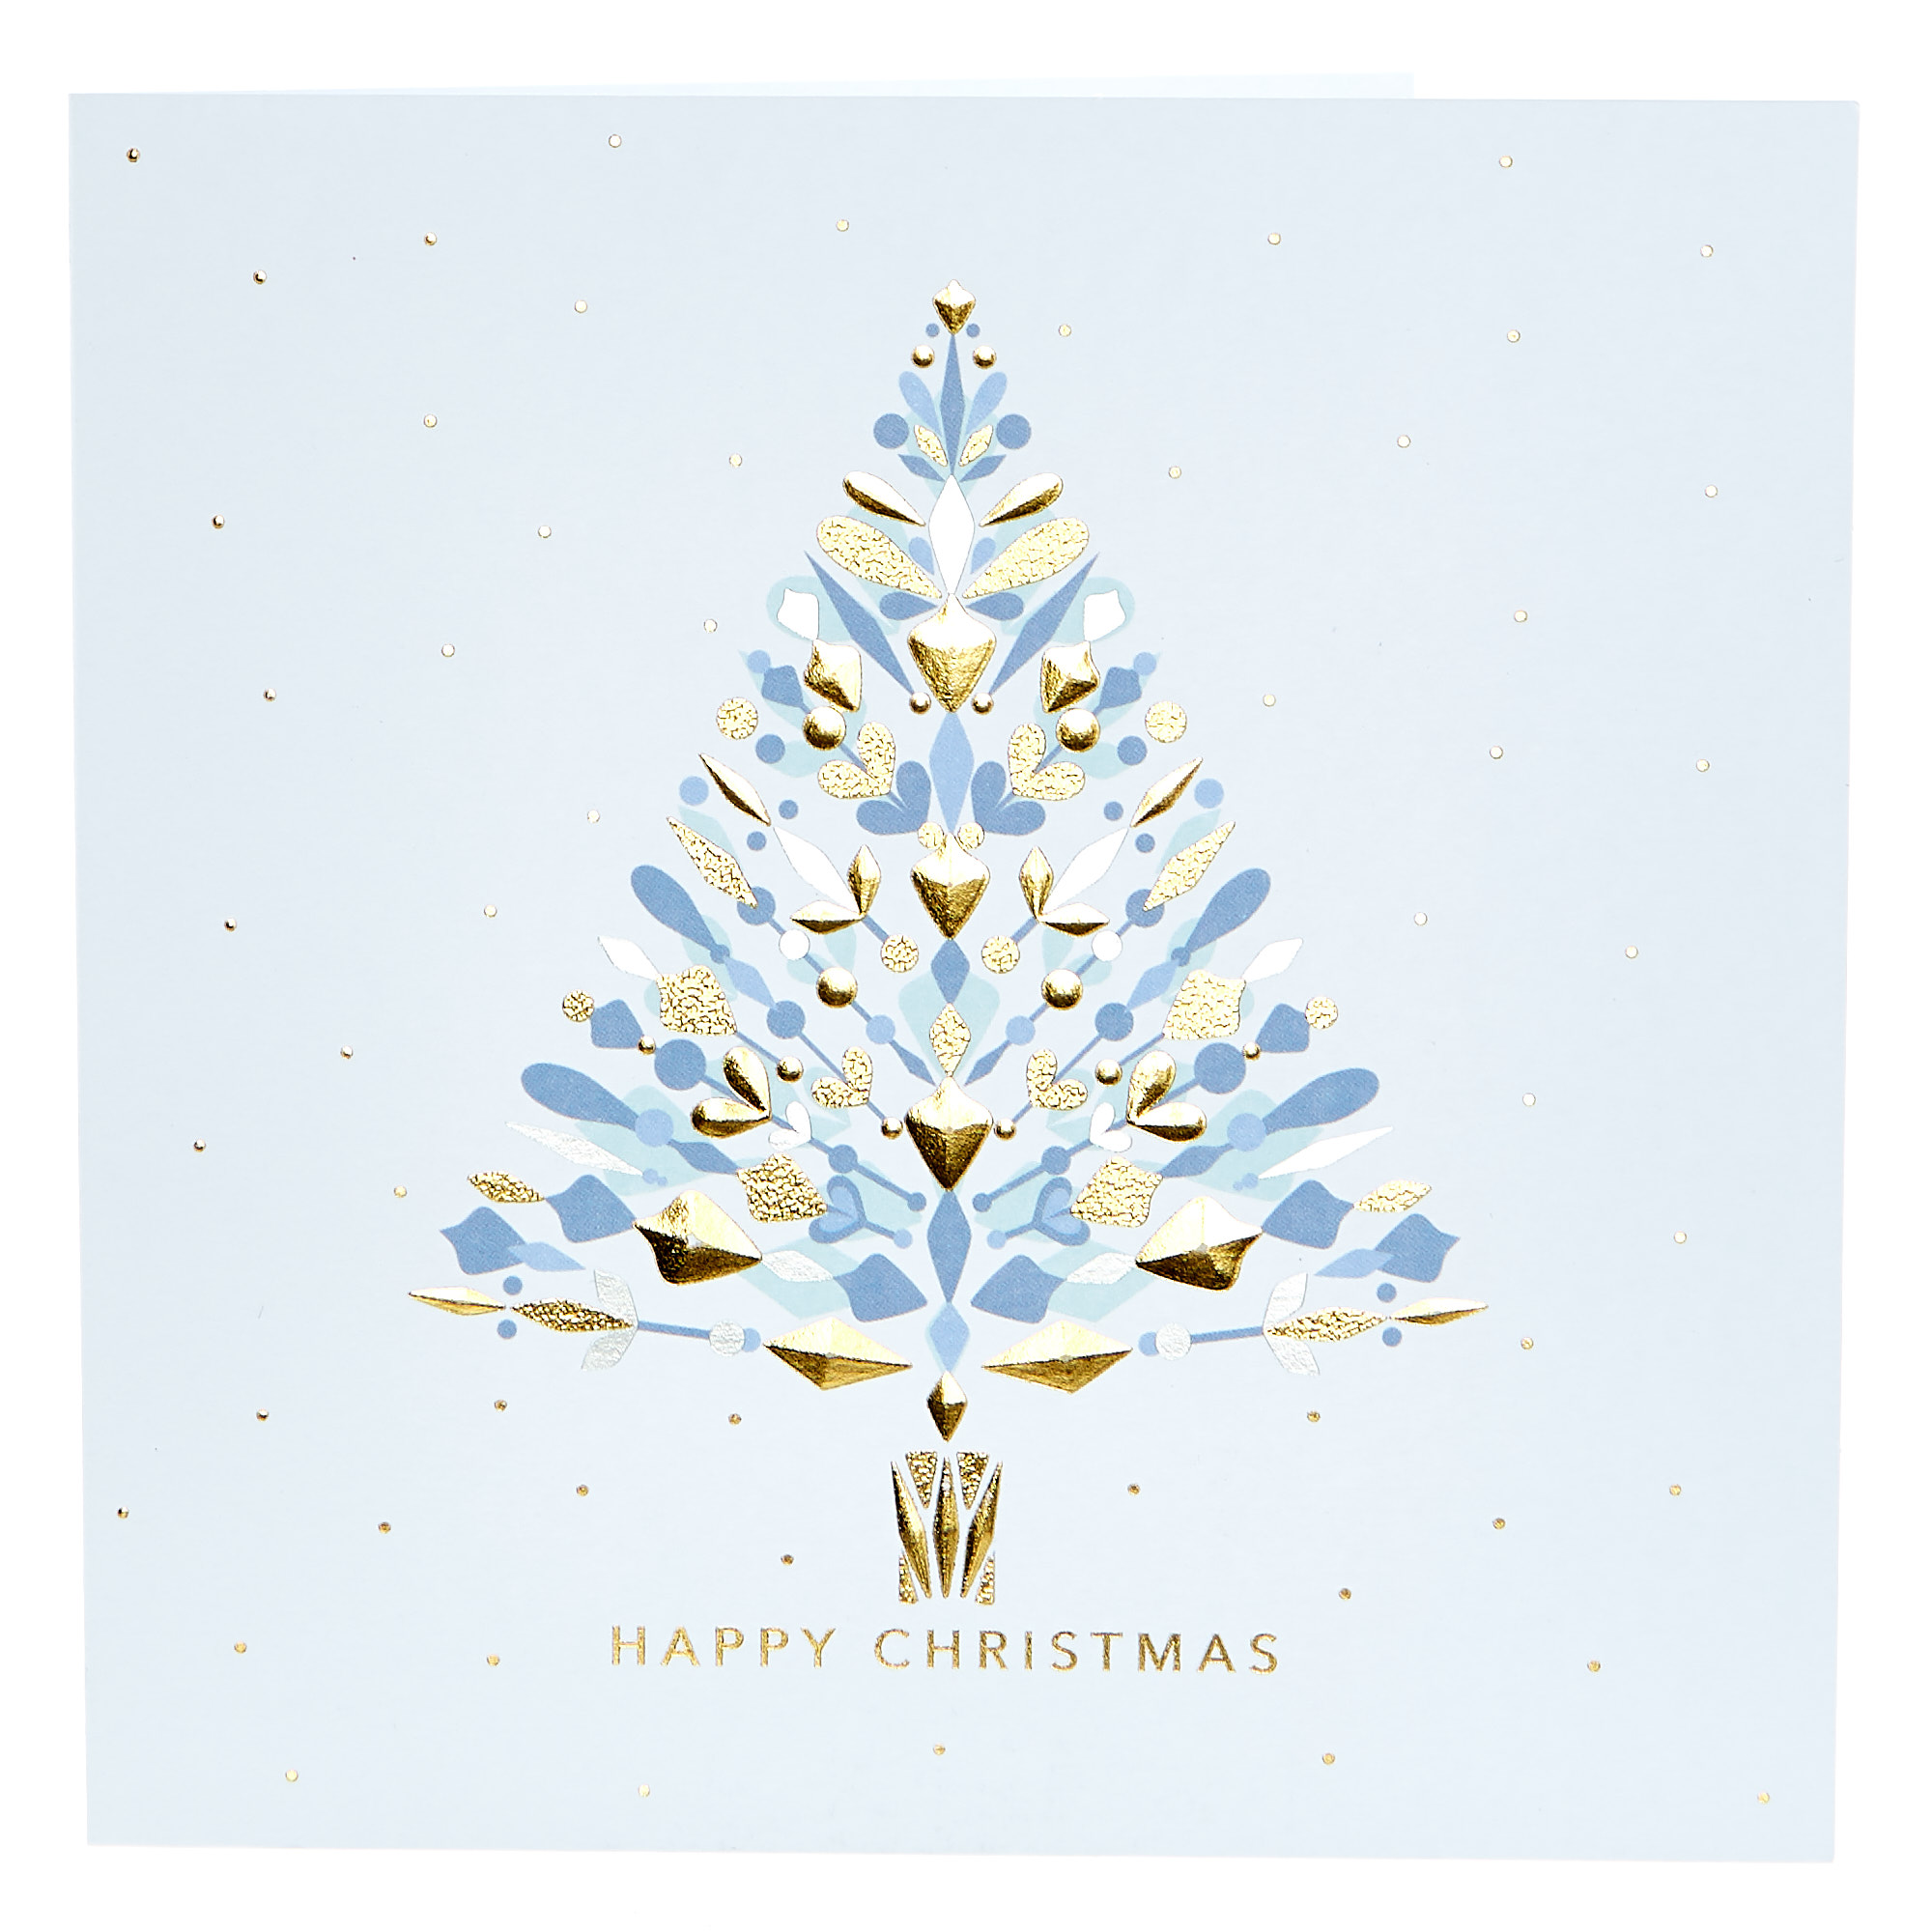 18 Modern Charity Christmas Cards - 2 Designs